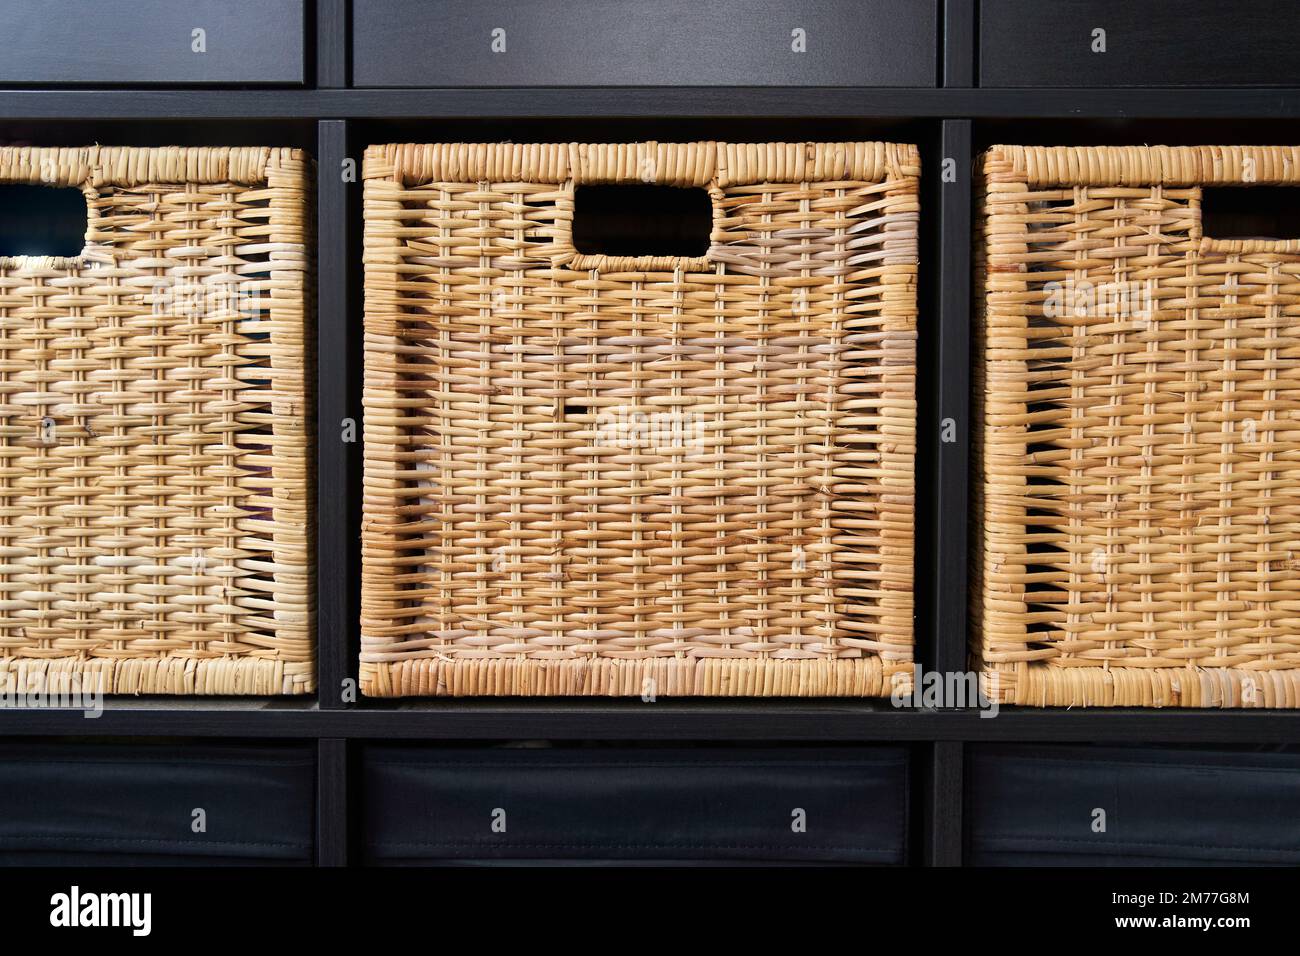 Wicker boxes for things on the shelves. Wardrobe for storage of things Stock Photo